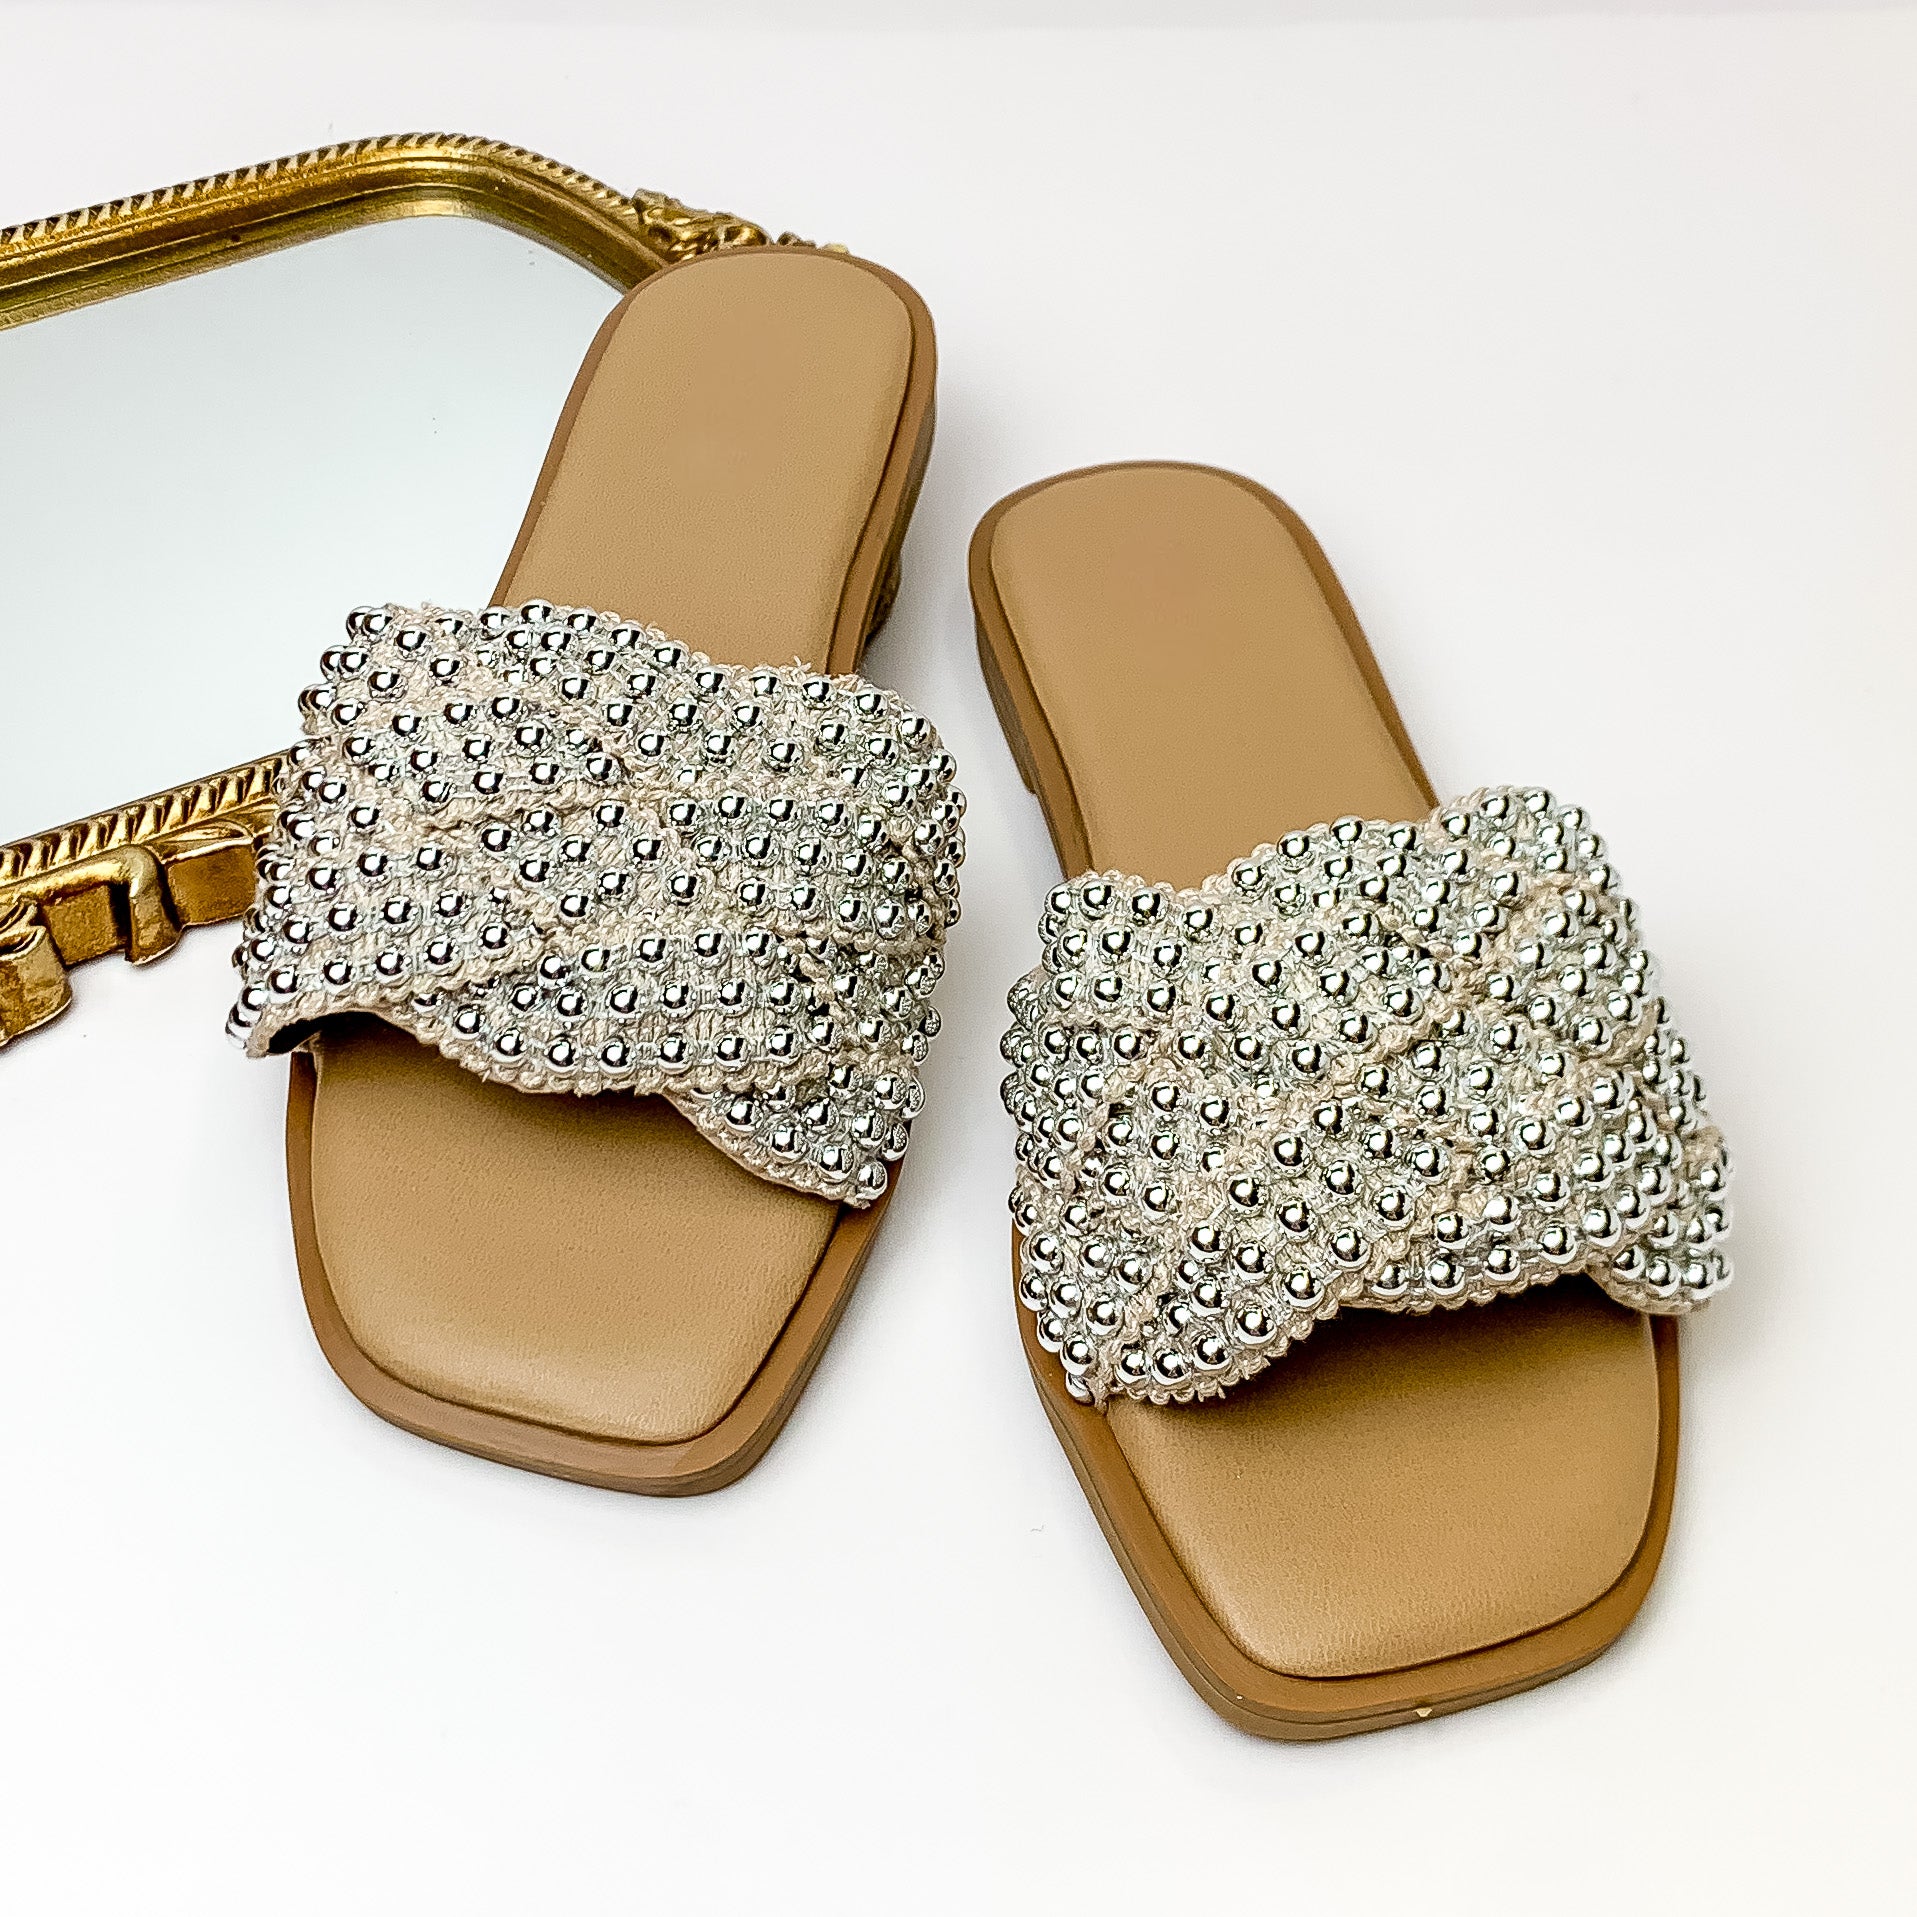 Tan sandals with a nude, knit band that has a silver beaded design. These sandals are pictured on a white background with a gold mirror in the top left corner. 